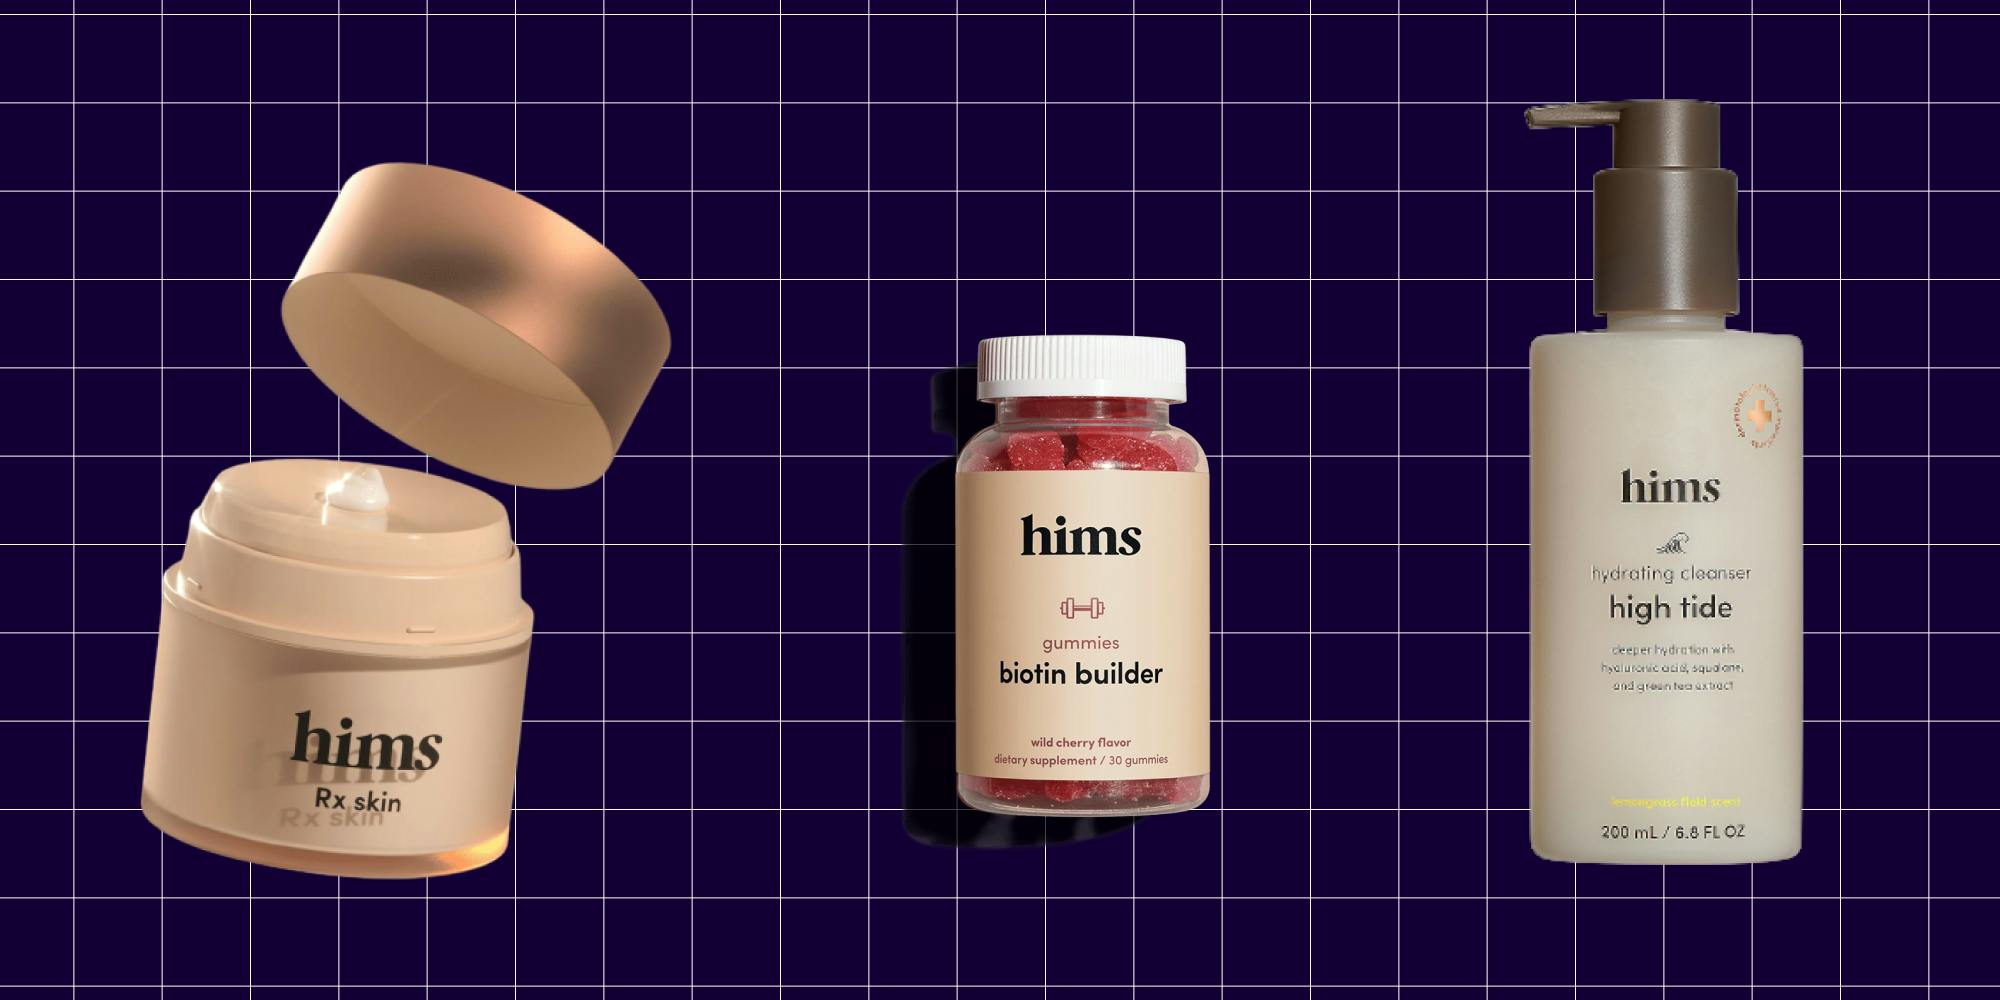 hims hairloss and skin care line